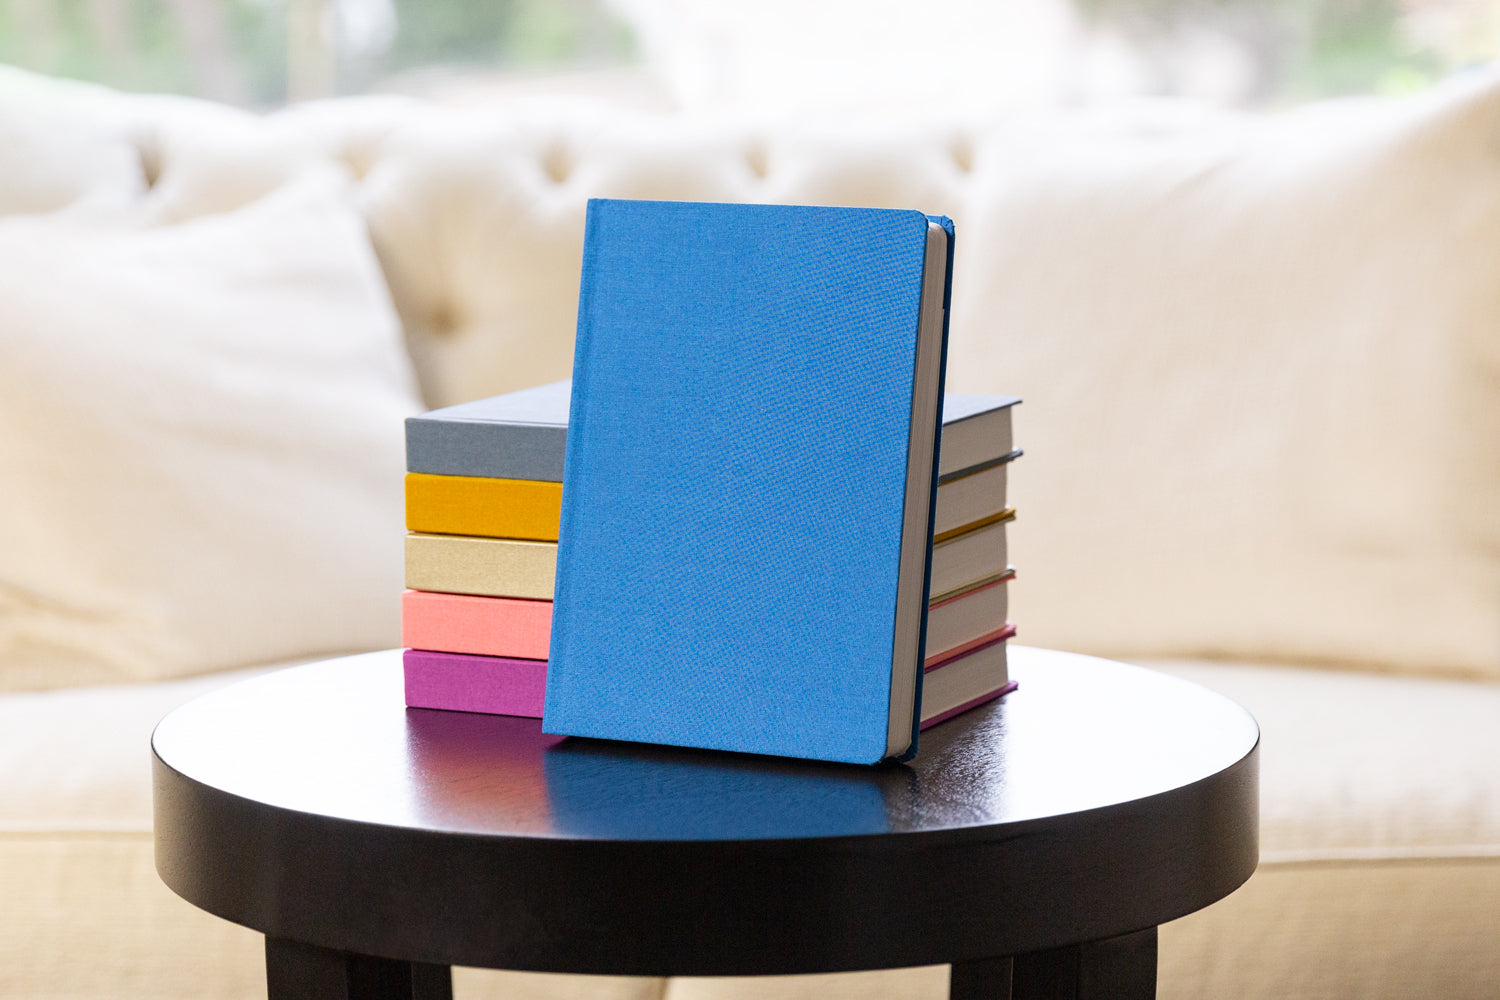 A stack of colorful planners on a dark wood table in front of a white couch